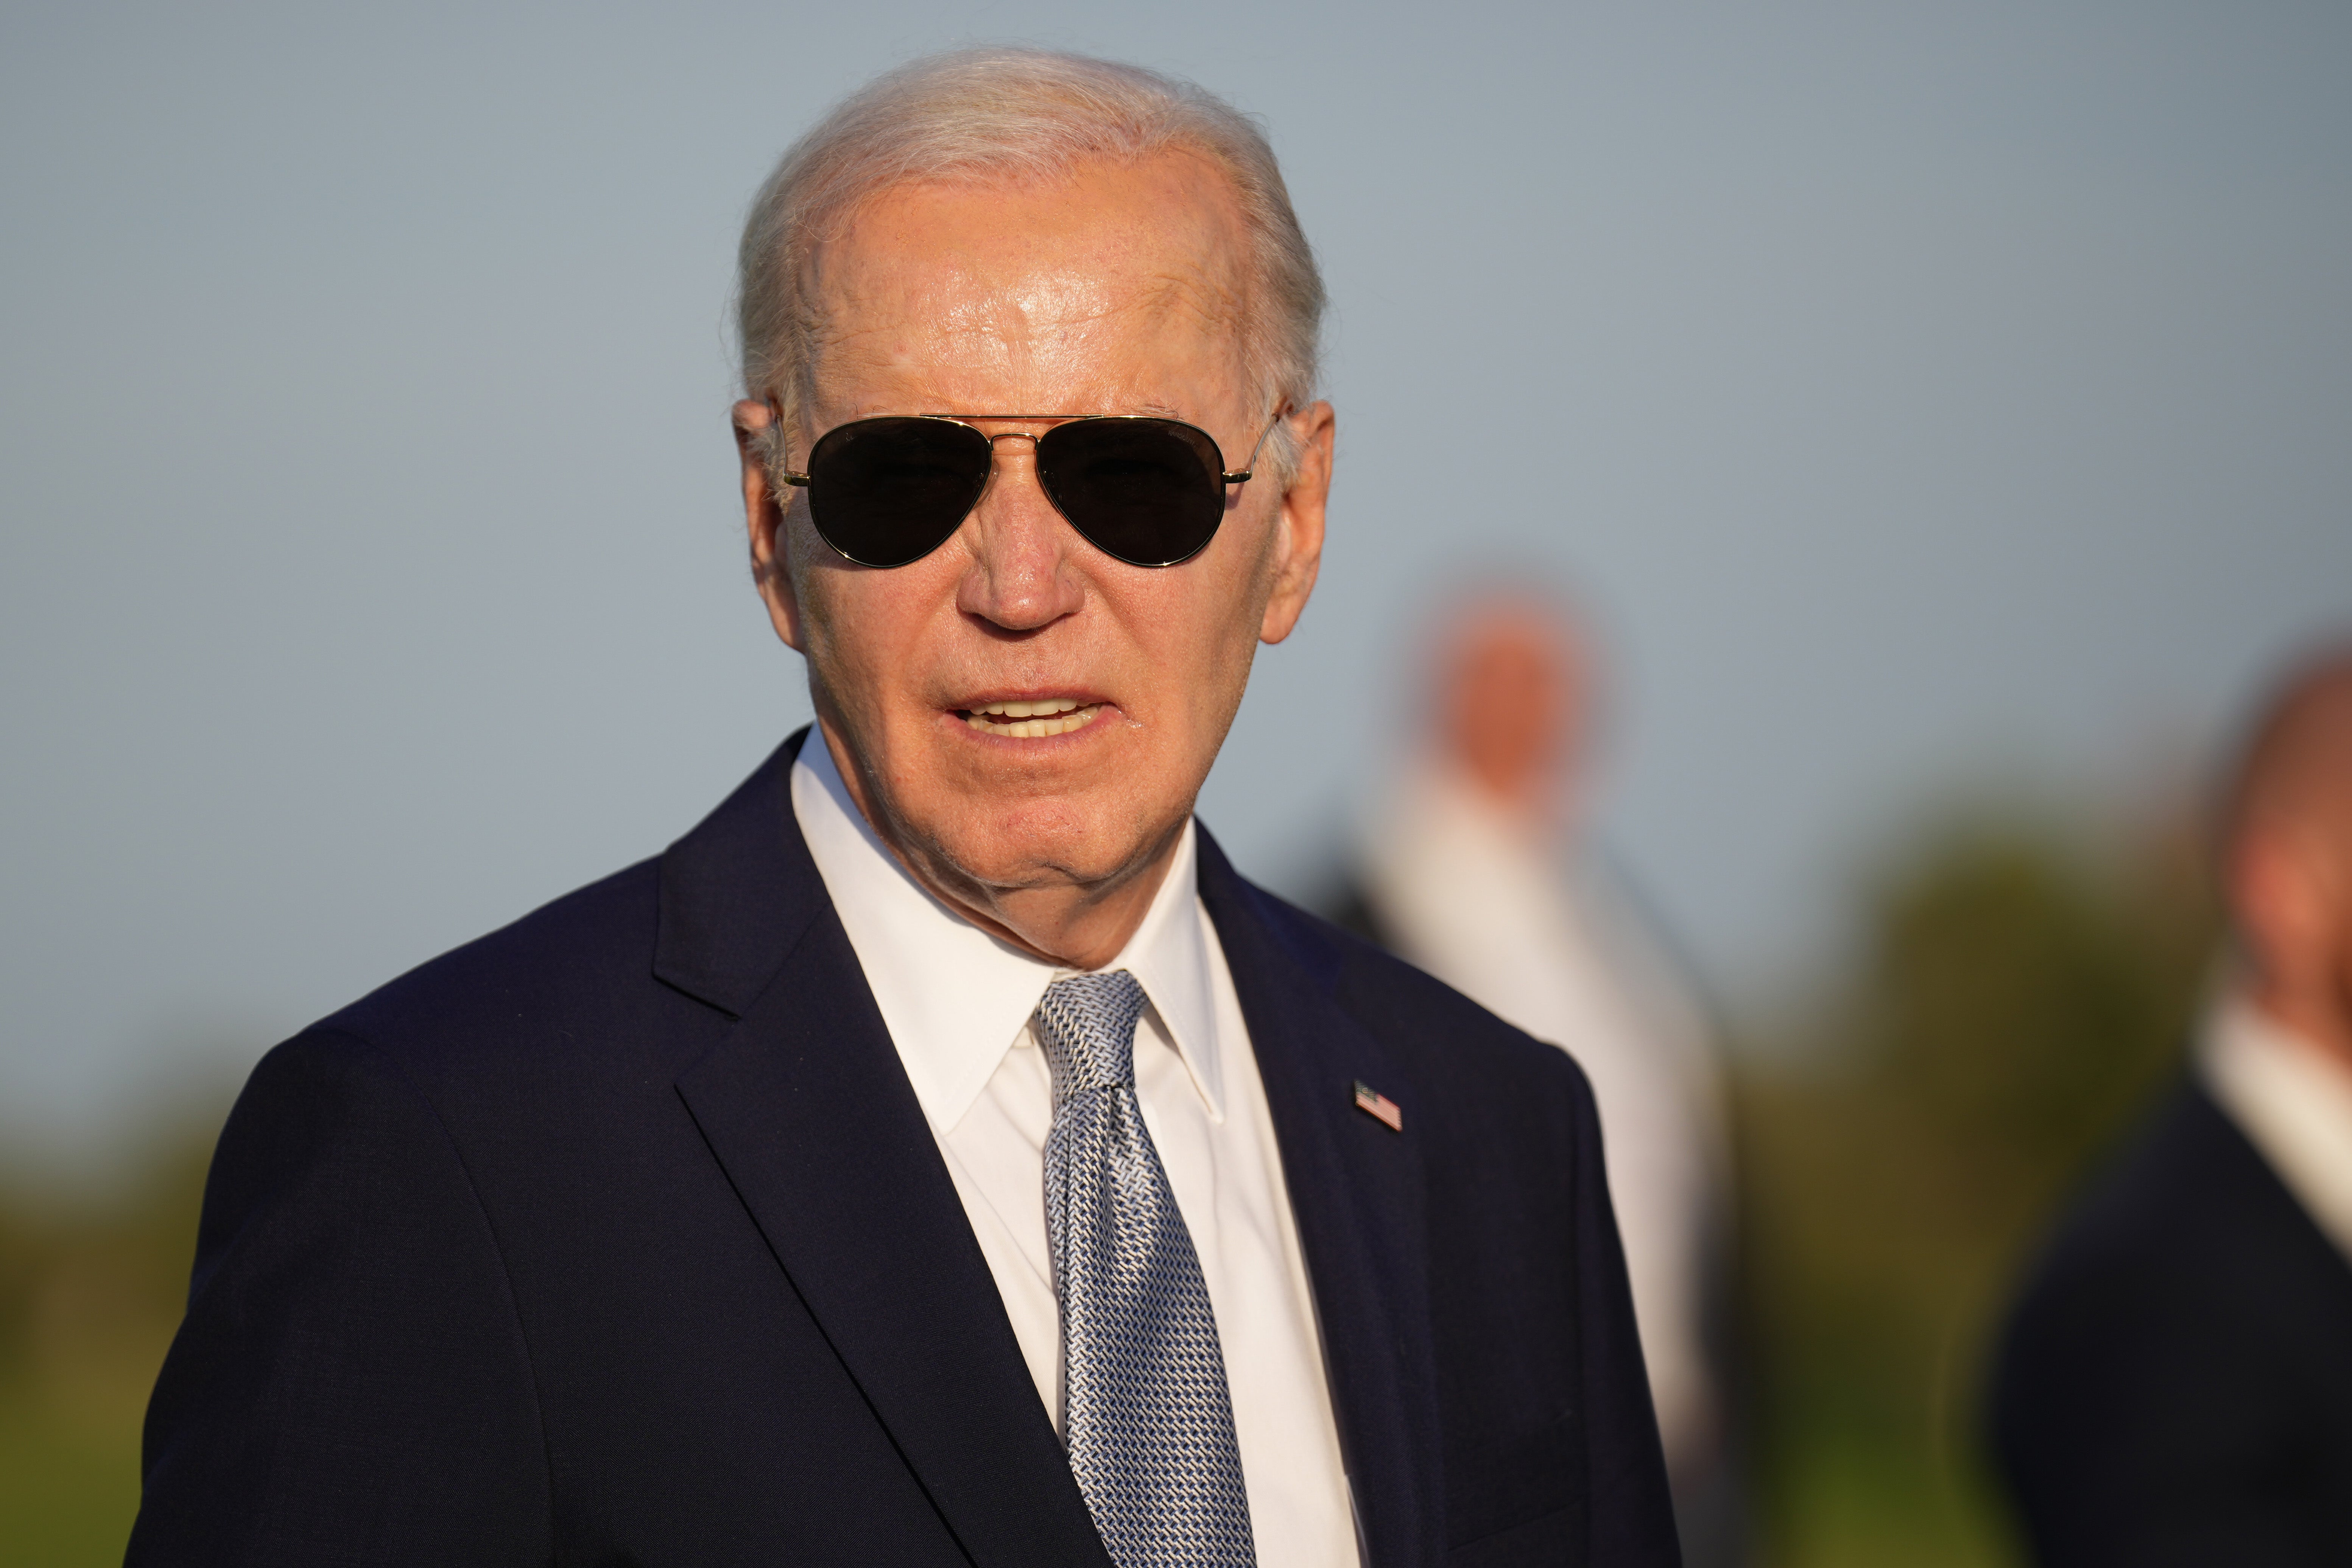 Biden once claimed a handicap of 6.7, although he hasn’t recorded a score since 2018